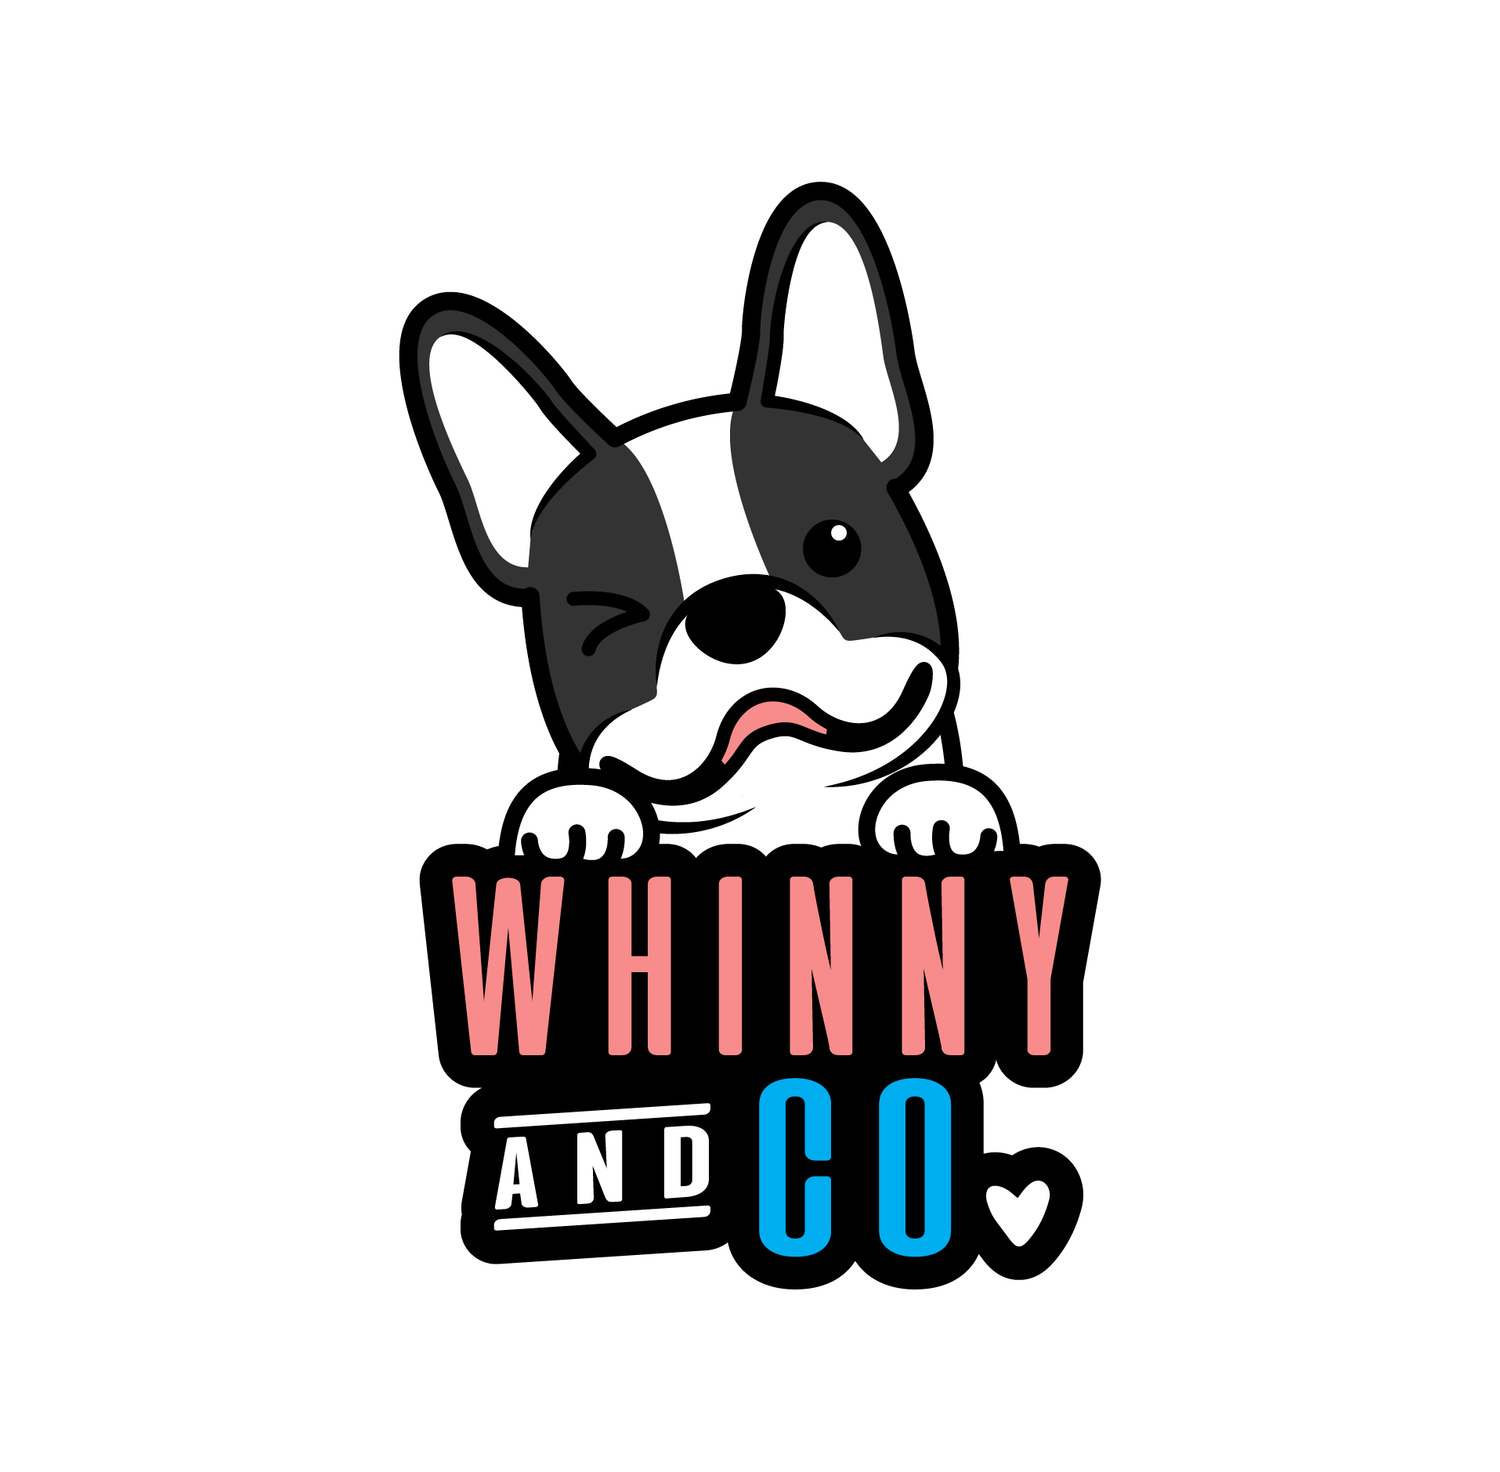 Whinny and Co